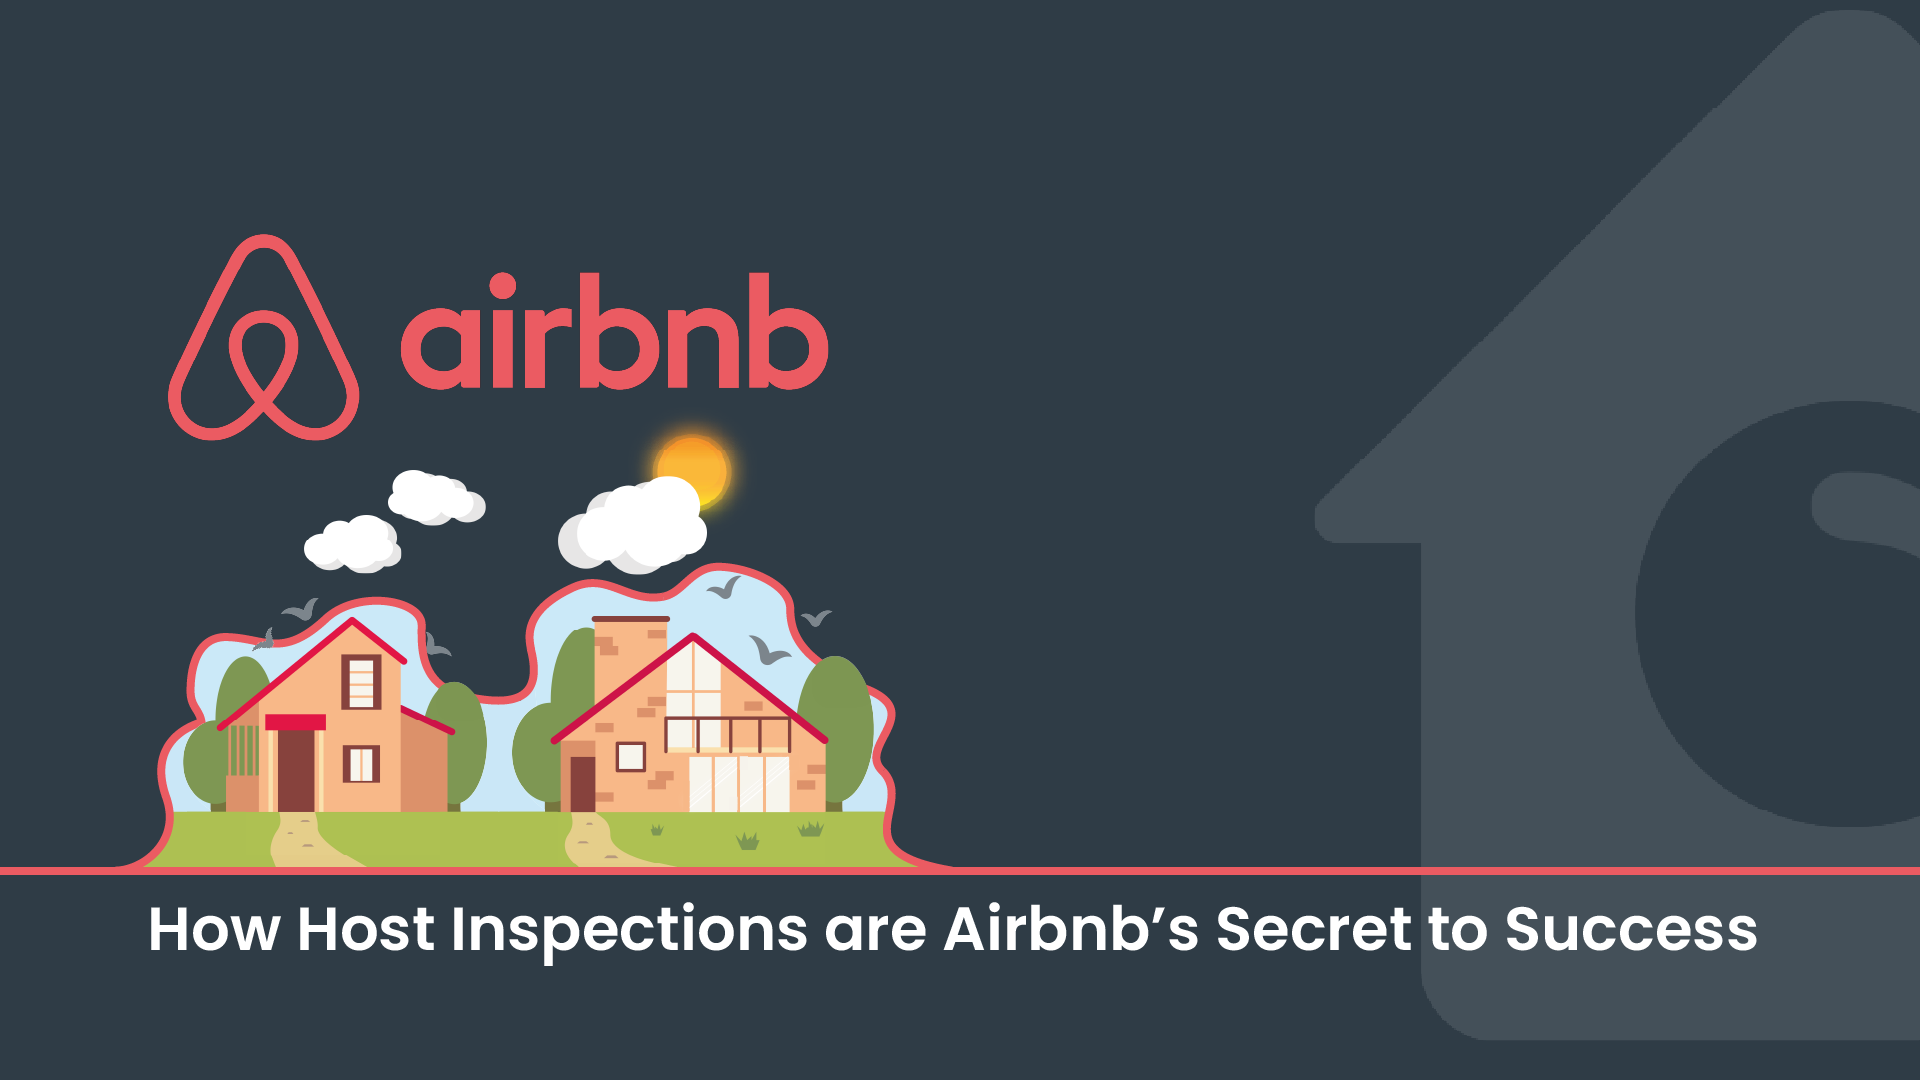 How Host Inspections are Airbnb’s Secret to Success